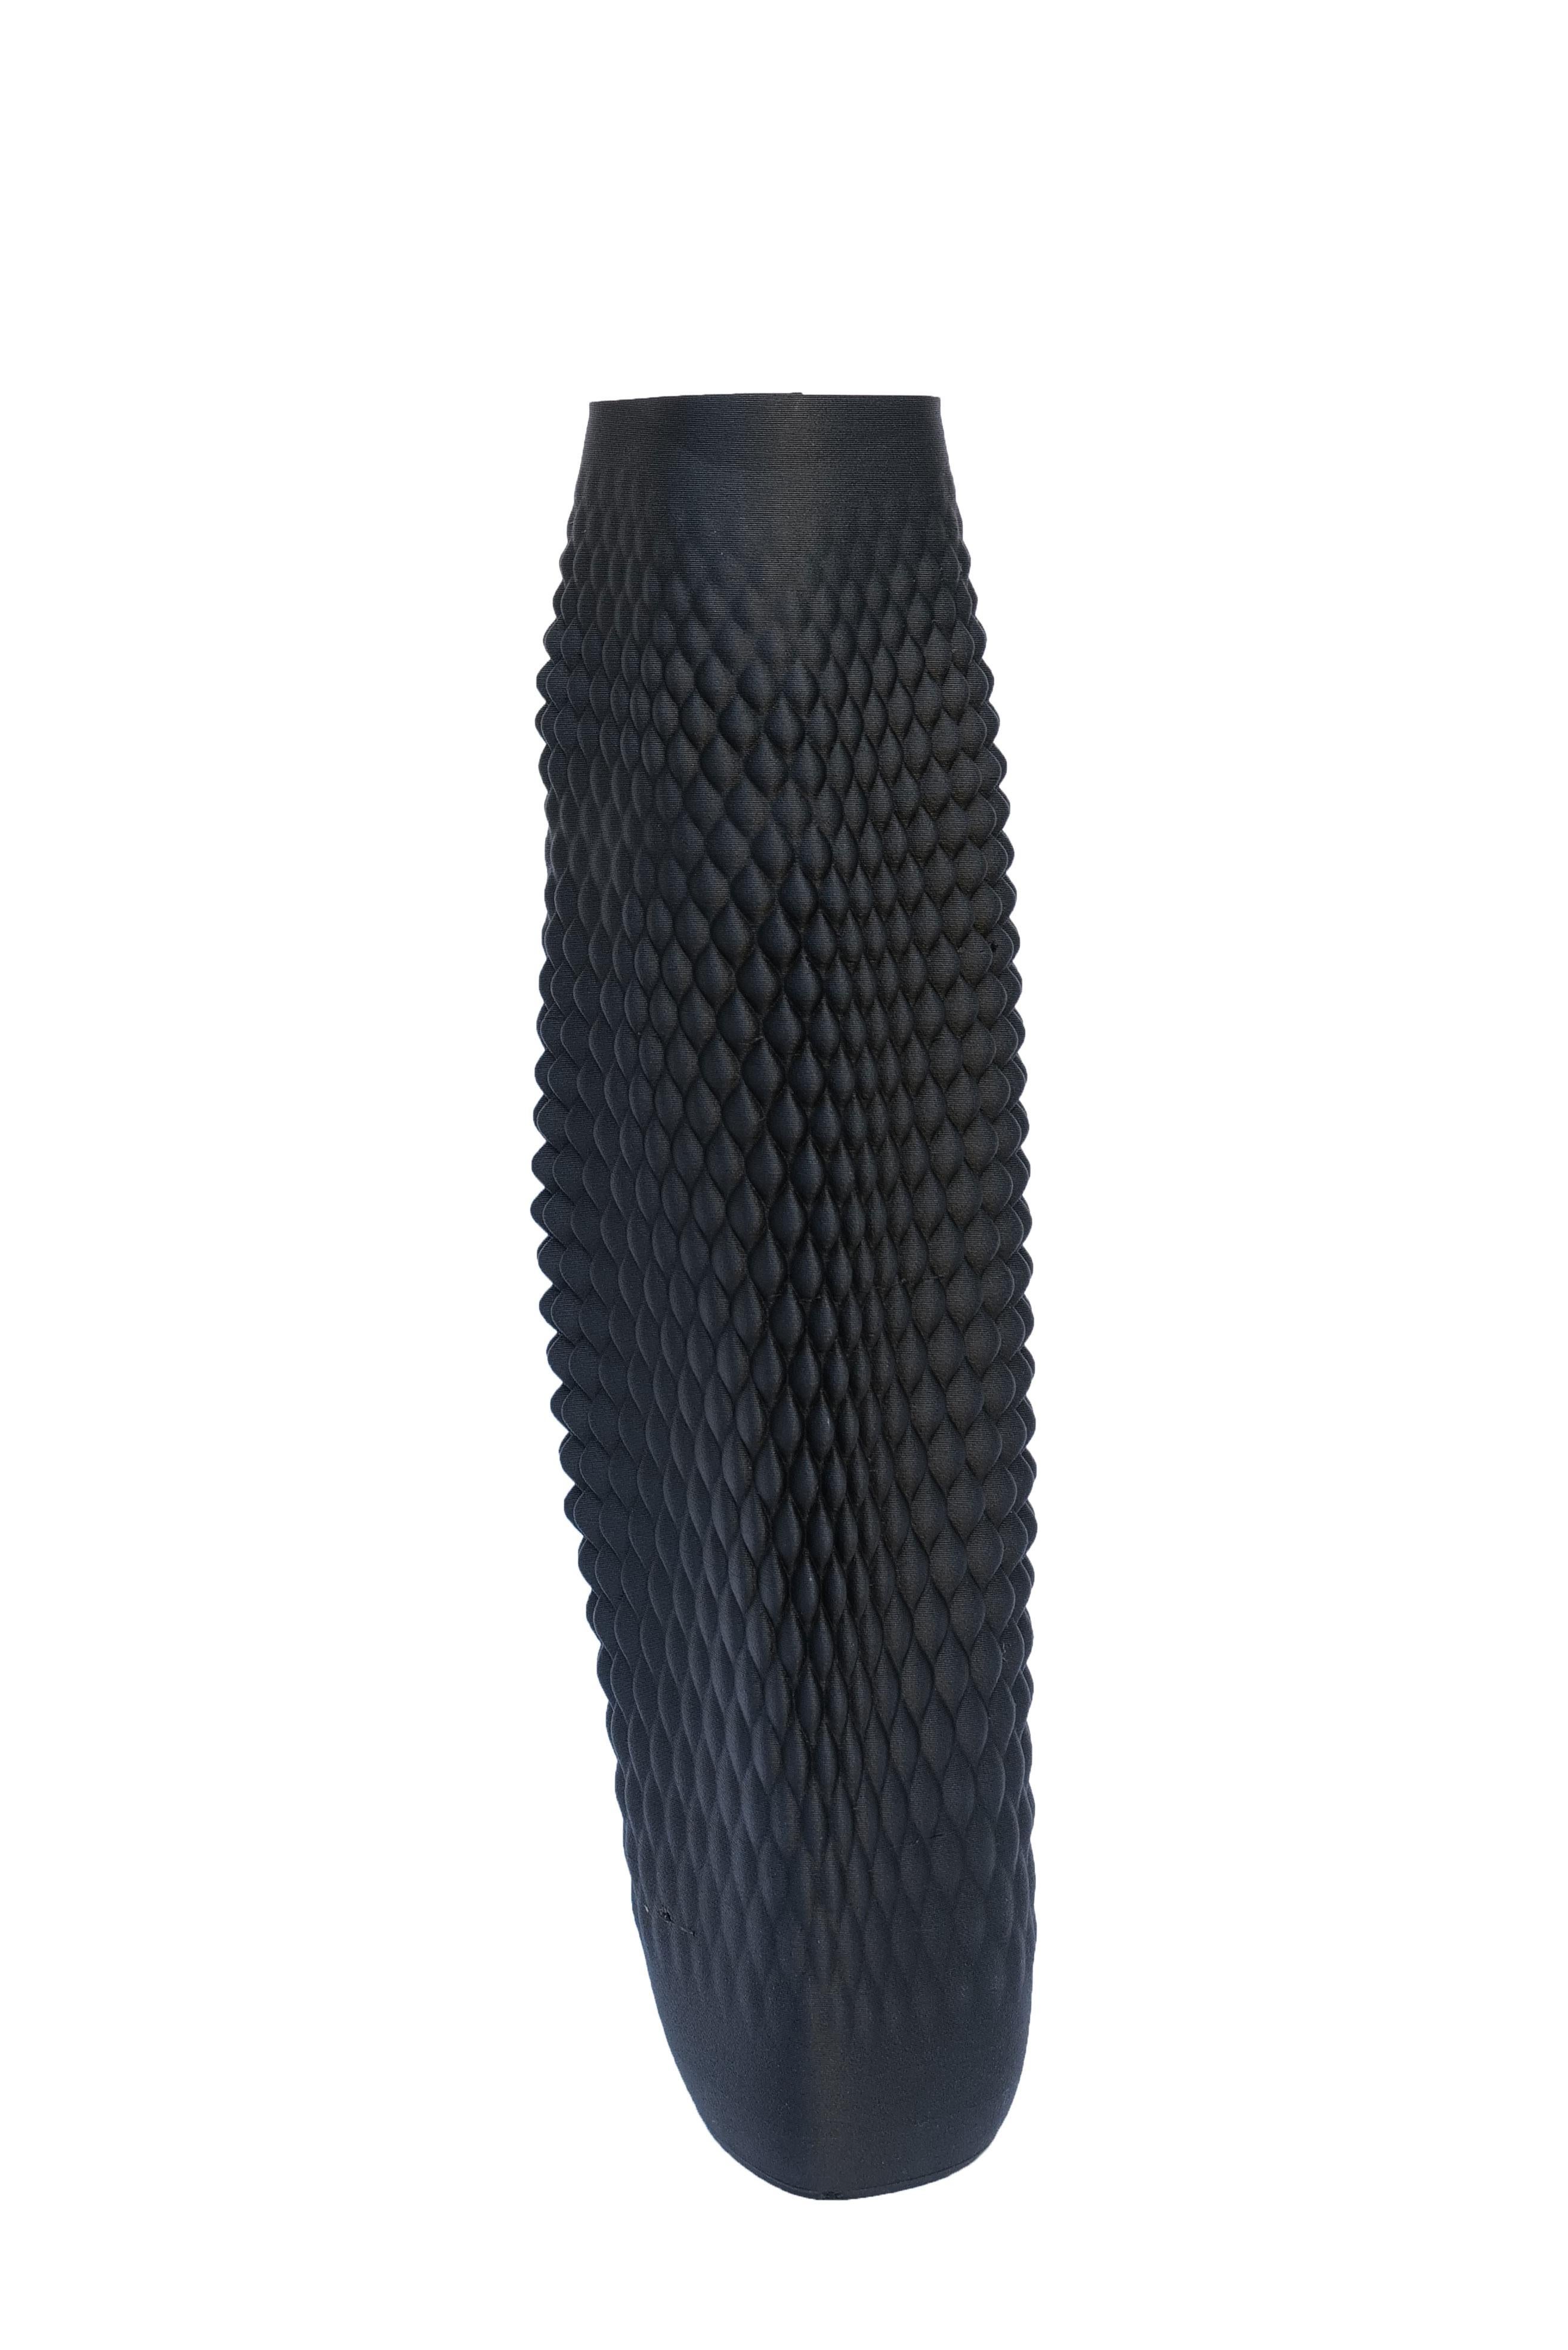 Modern 21st Century Contemporary Ebony India Vase Handcrafted, Italy For Sale